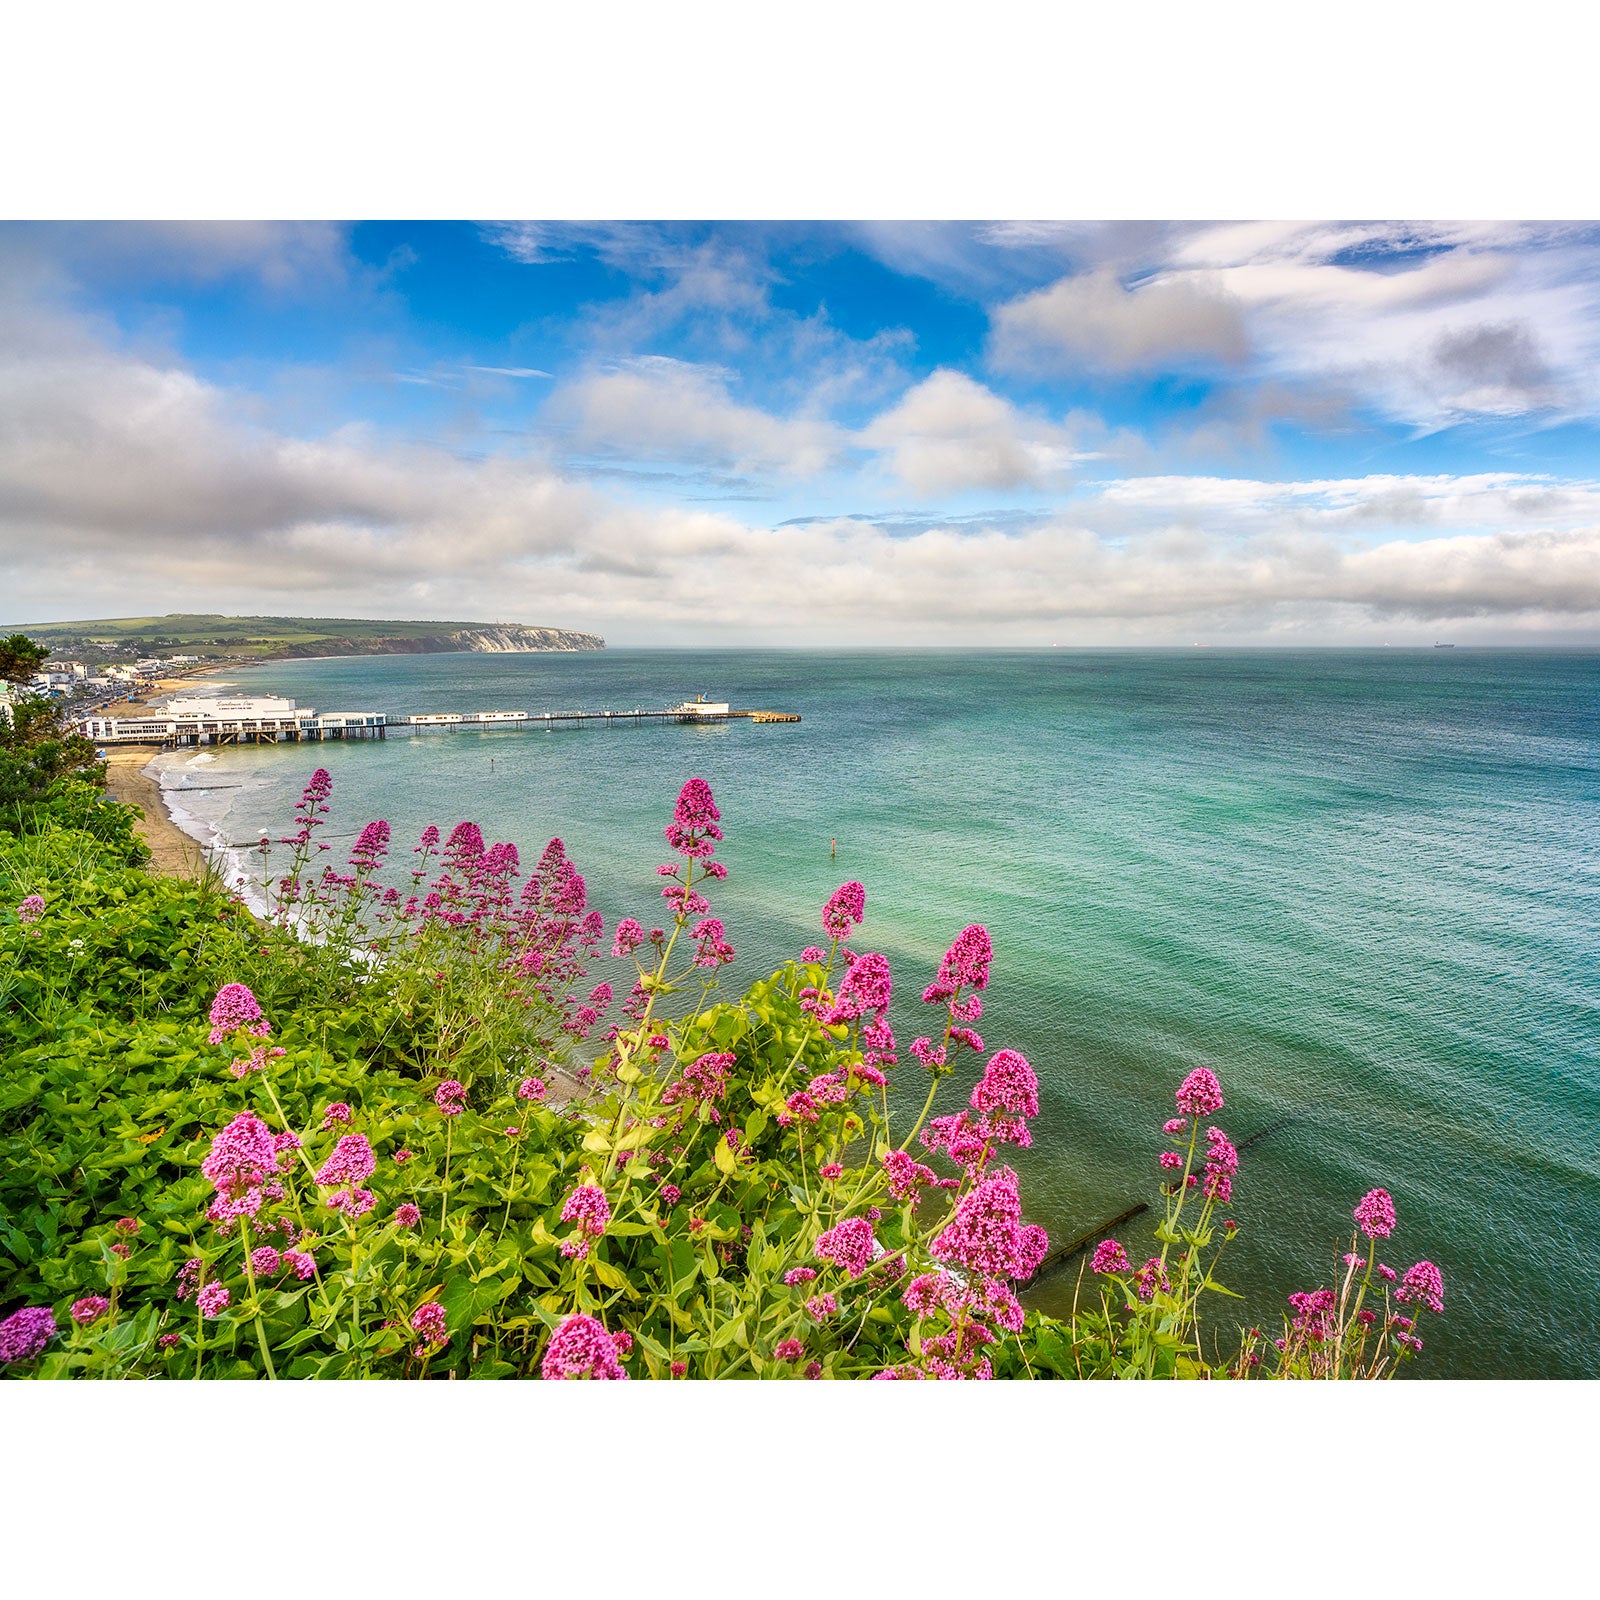 Coastal landscape with purple flowers in the foreground, a pier extending into the sea near Gascoigne Isle, and cliffs in the distance under a partly cloudy sky taken by Available Light Photography at Sandown Bay.